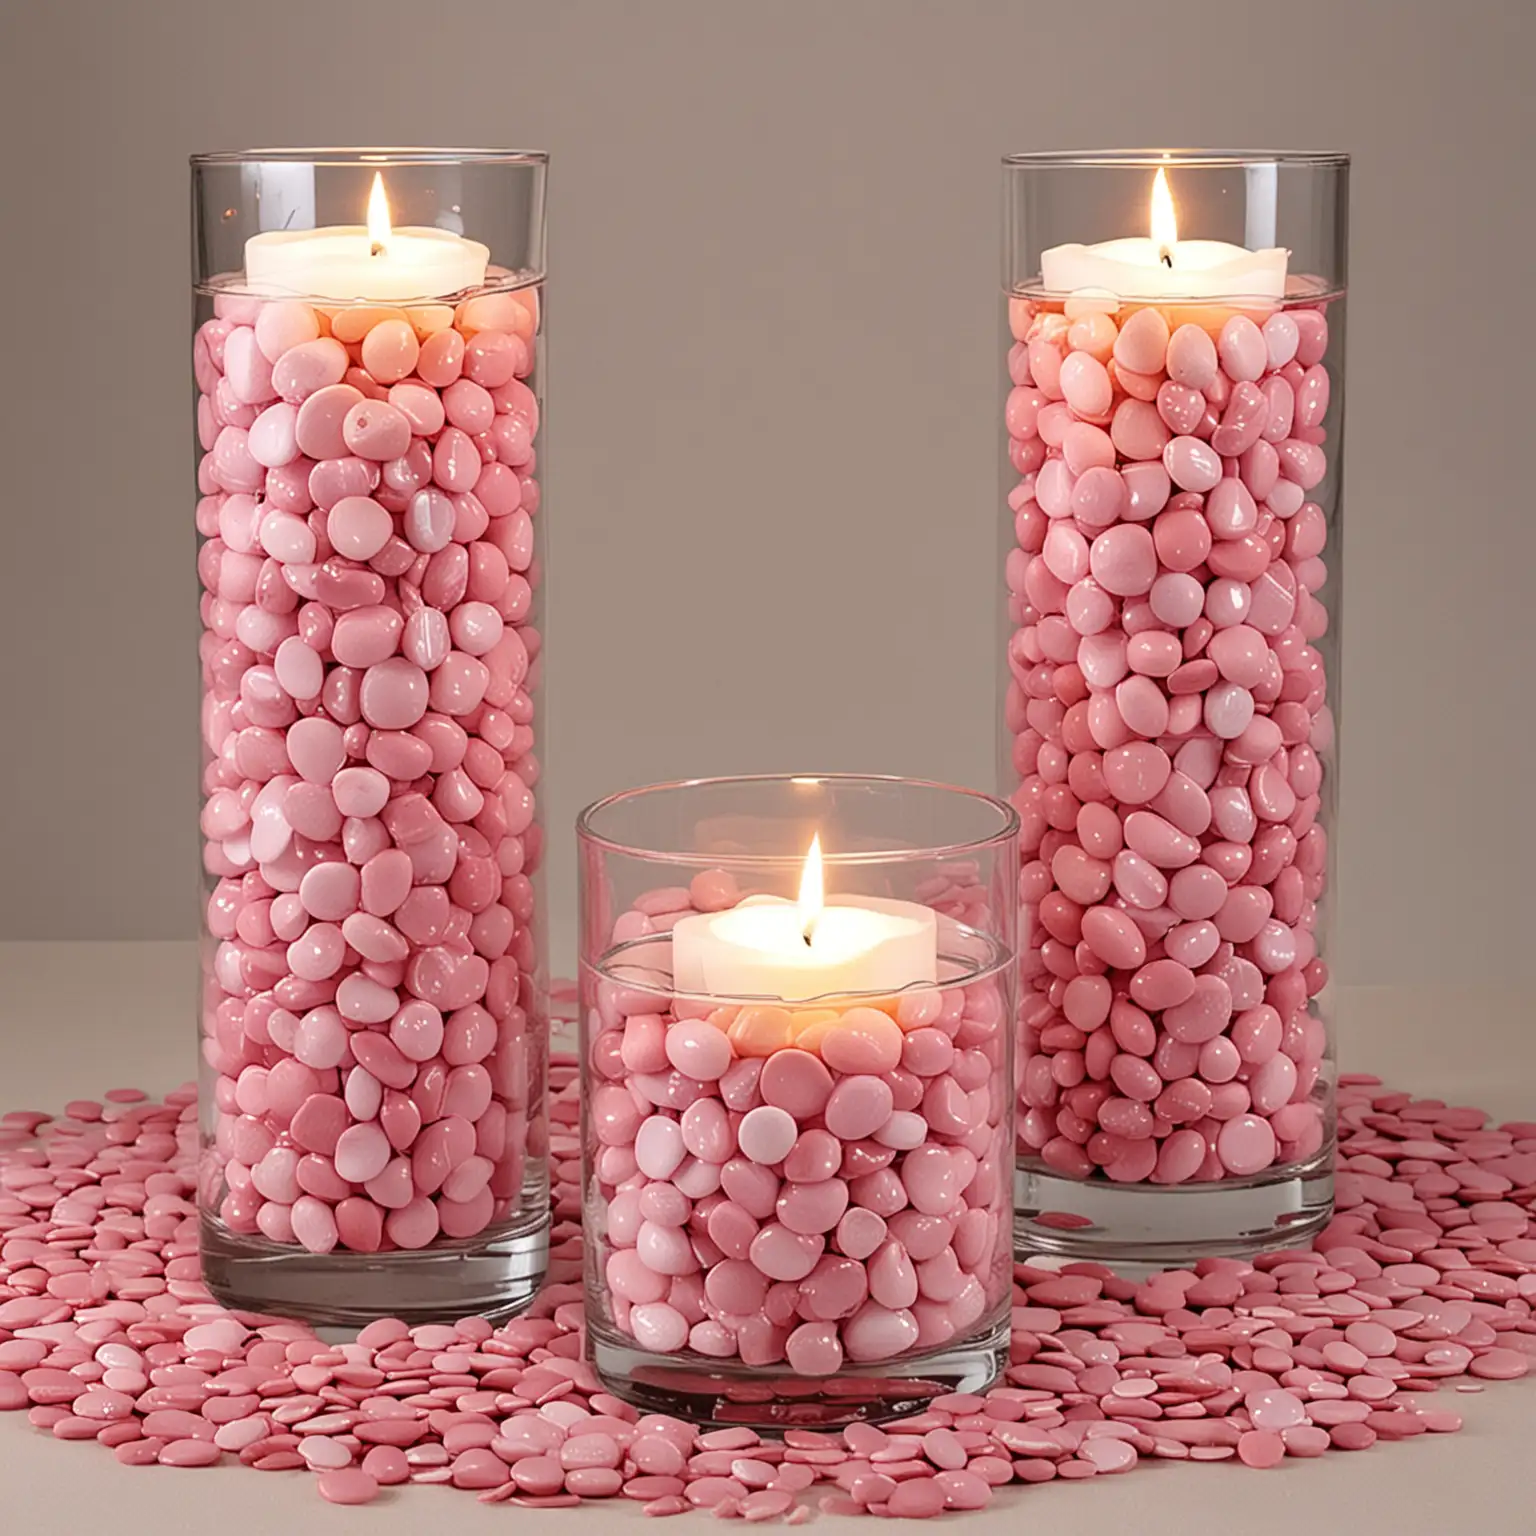 simple cylinder glass vase wedding centerpiece DIY with polished pink pebbles